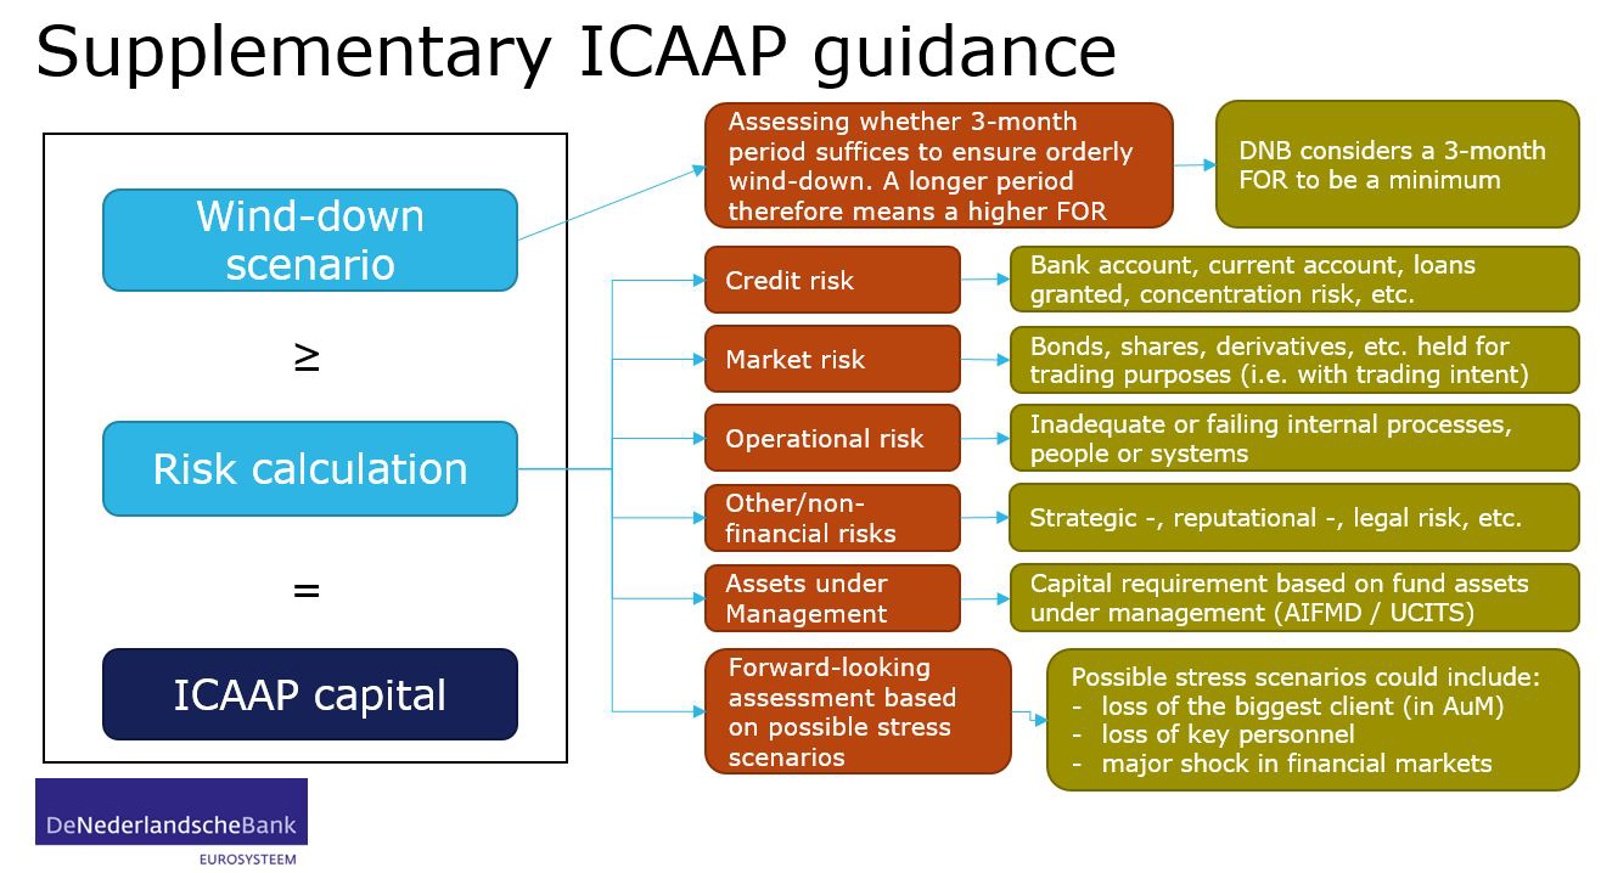 An ICAAP is a comprehensive assessment of all the risks to which an institution is or may be exposed.